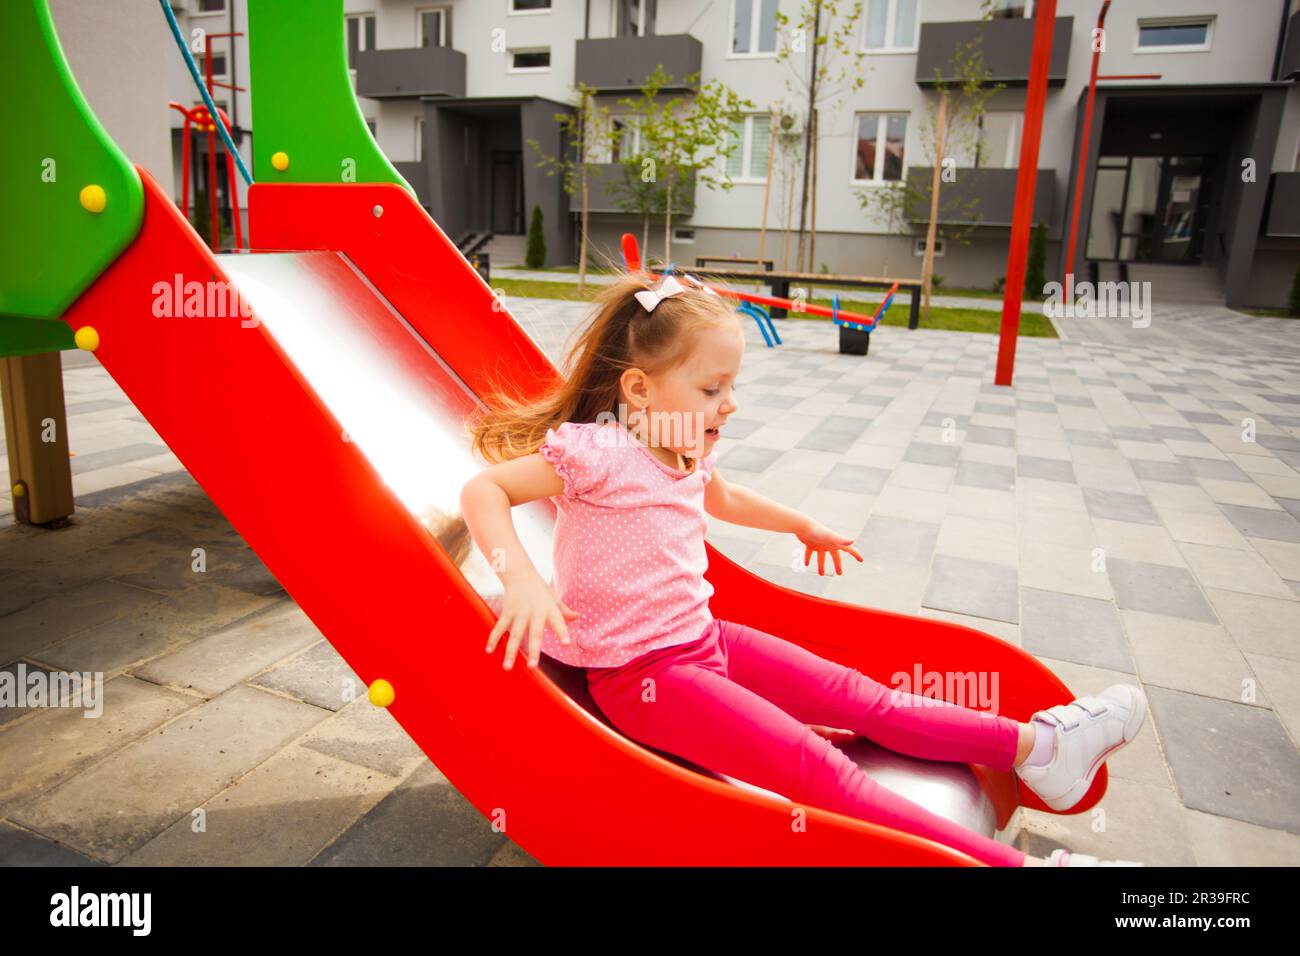 Happy little girl on slide at outdoors playground Stock Photo